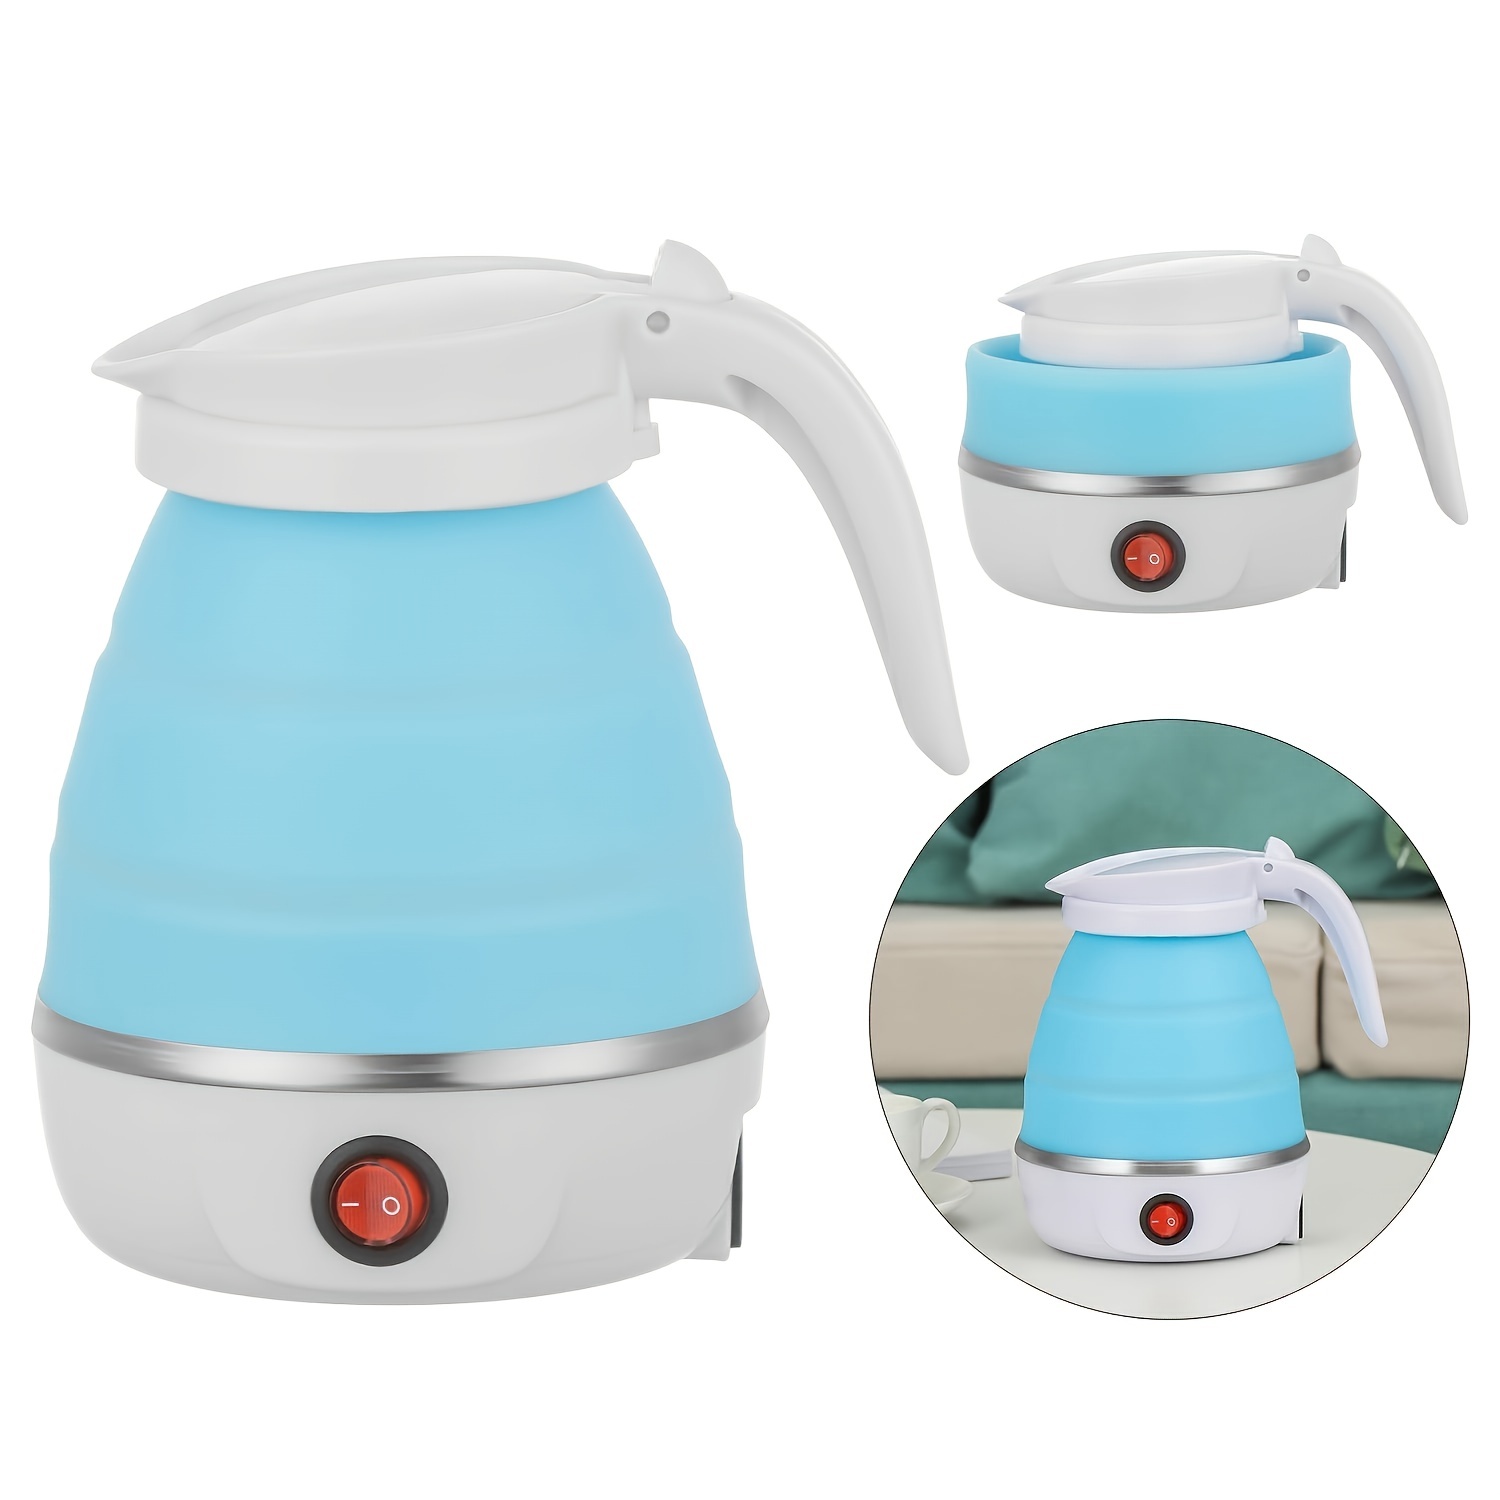 Food Grade Silicone Travel Foldable Water Heater Boiler Tea Kettle